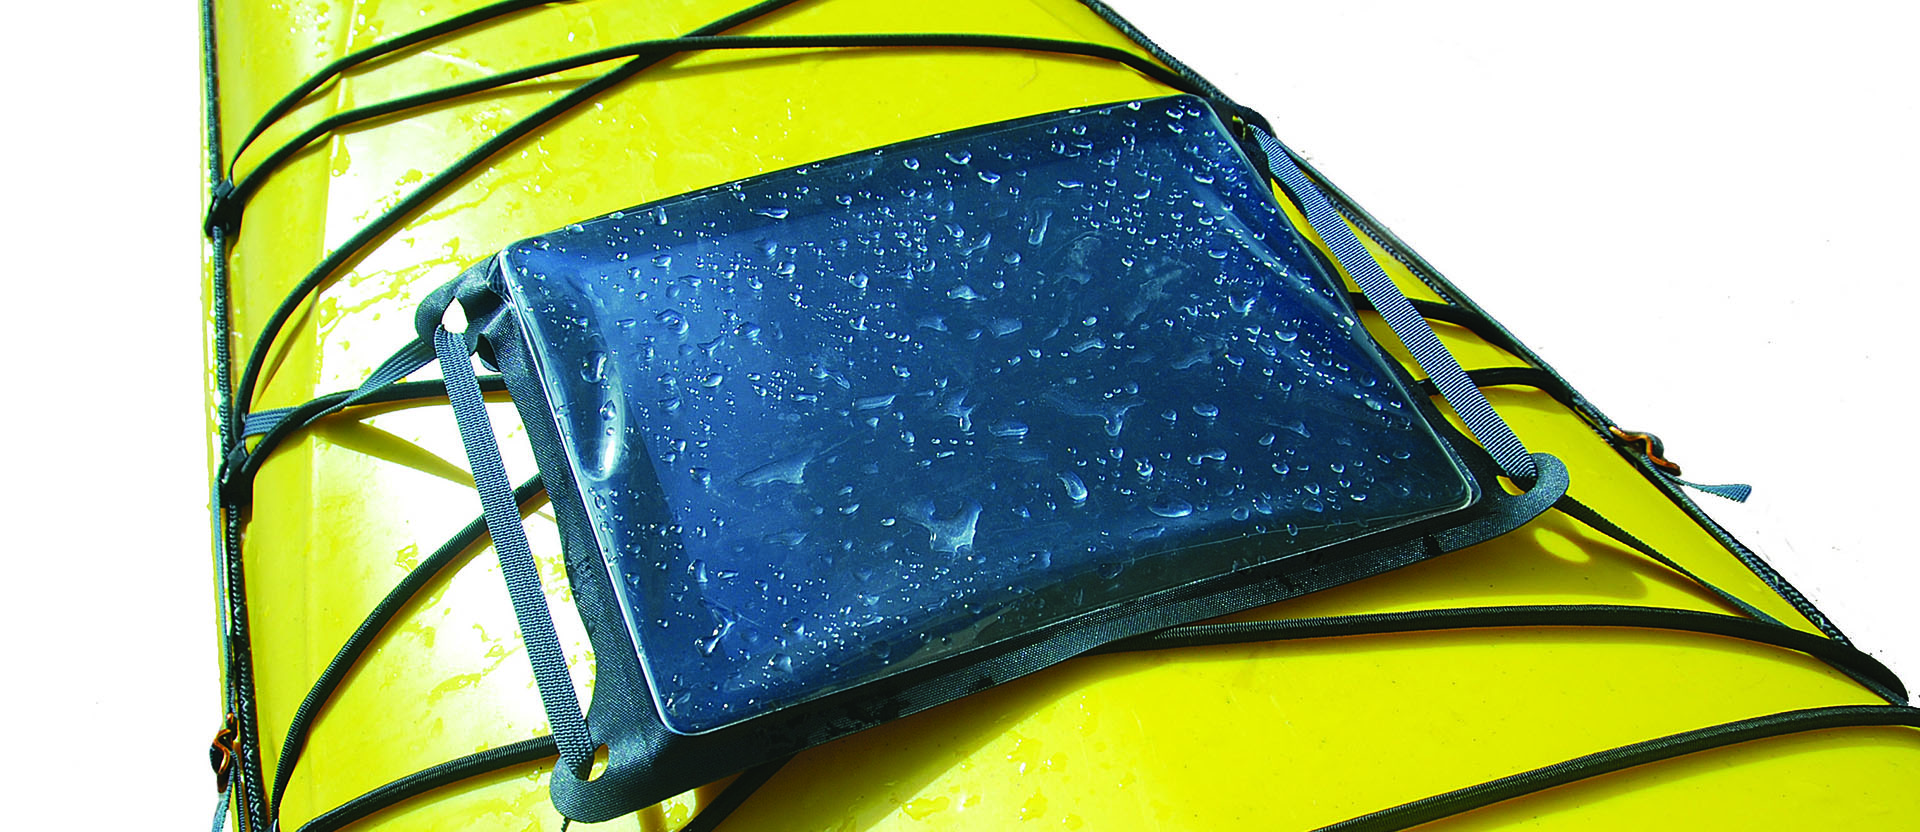 Bags, Boxes, Cases & Packs: TPU Guide Waterproof Case for Tablet by Sea to Summit - Image 4226